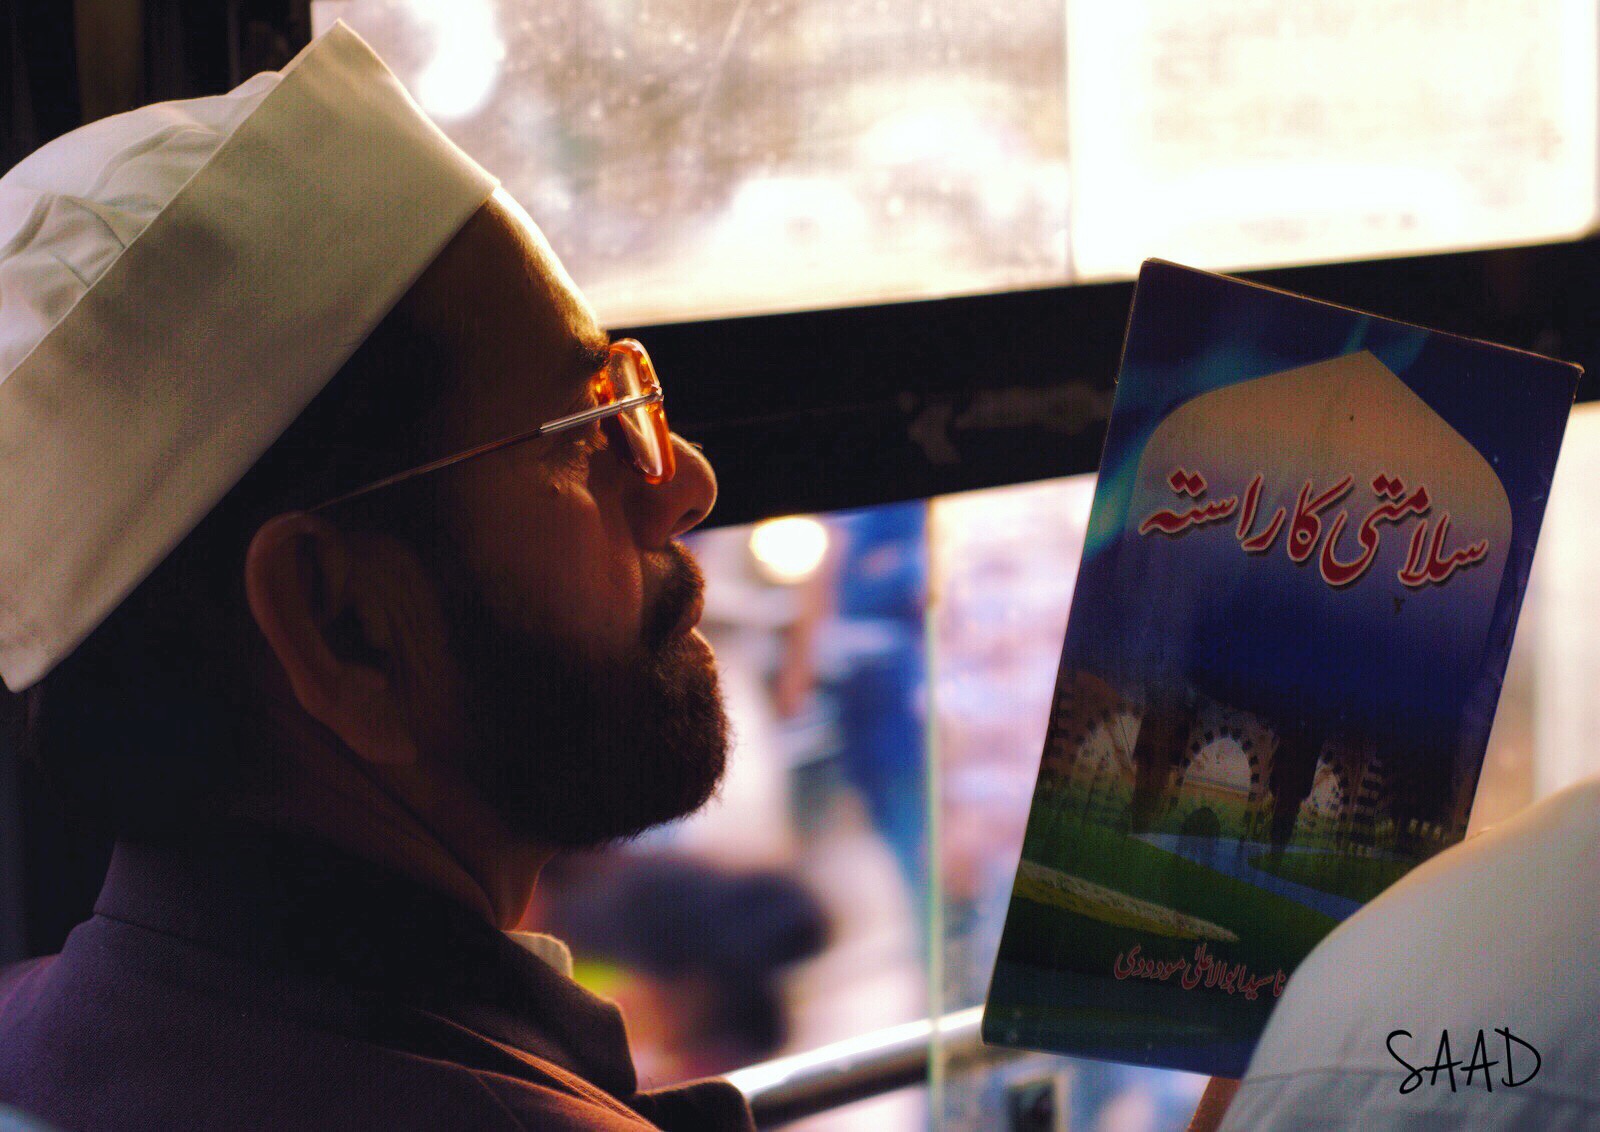 The book says ‘Safarnama’ which means travelling stories